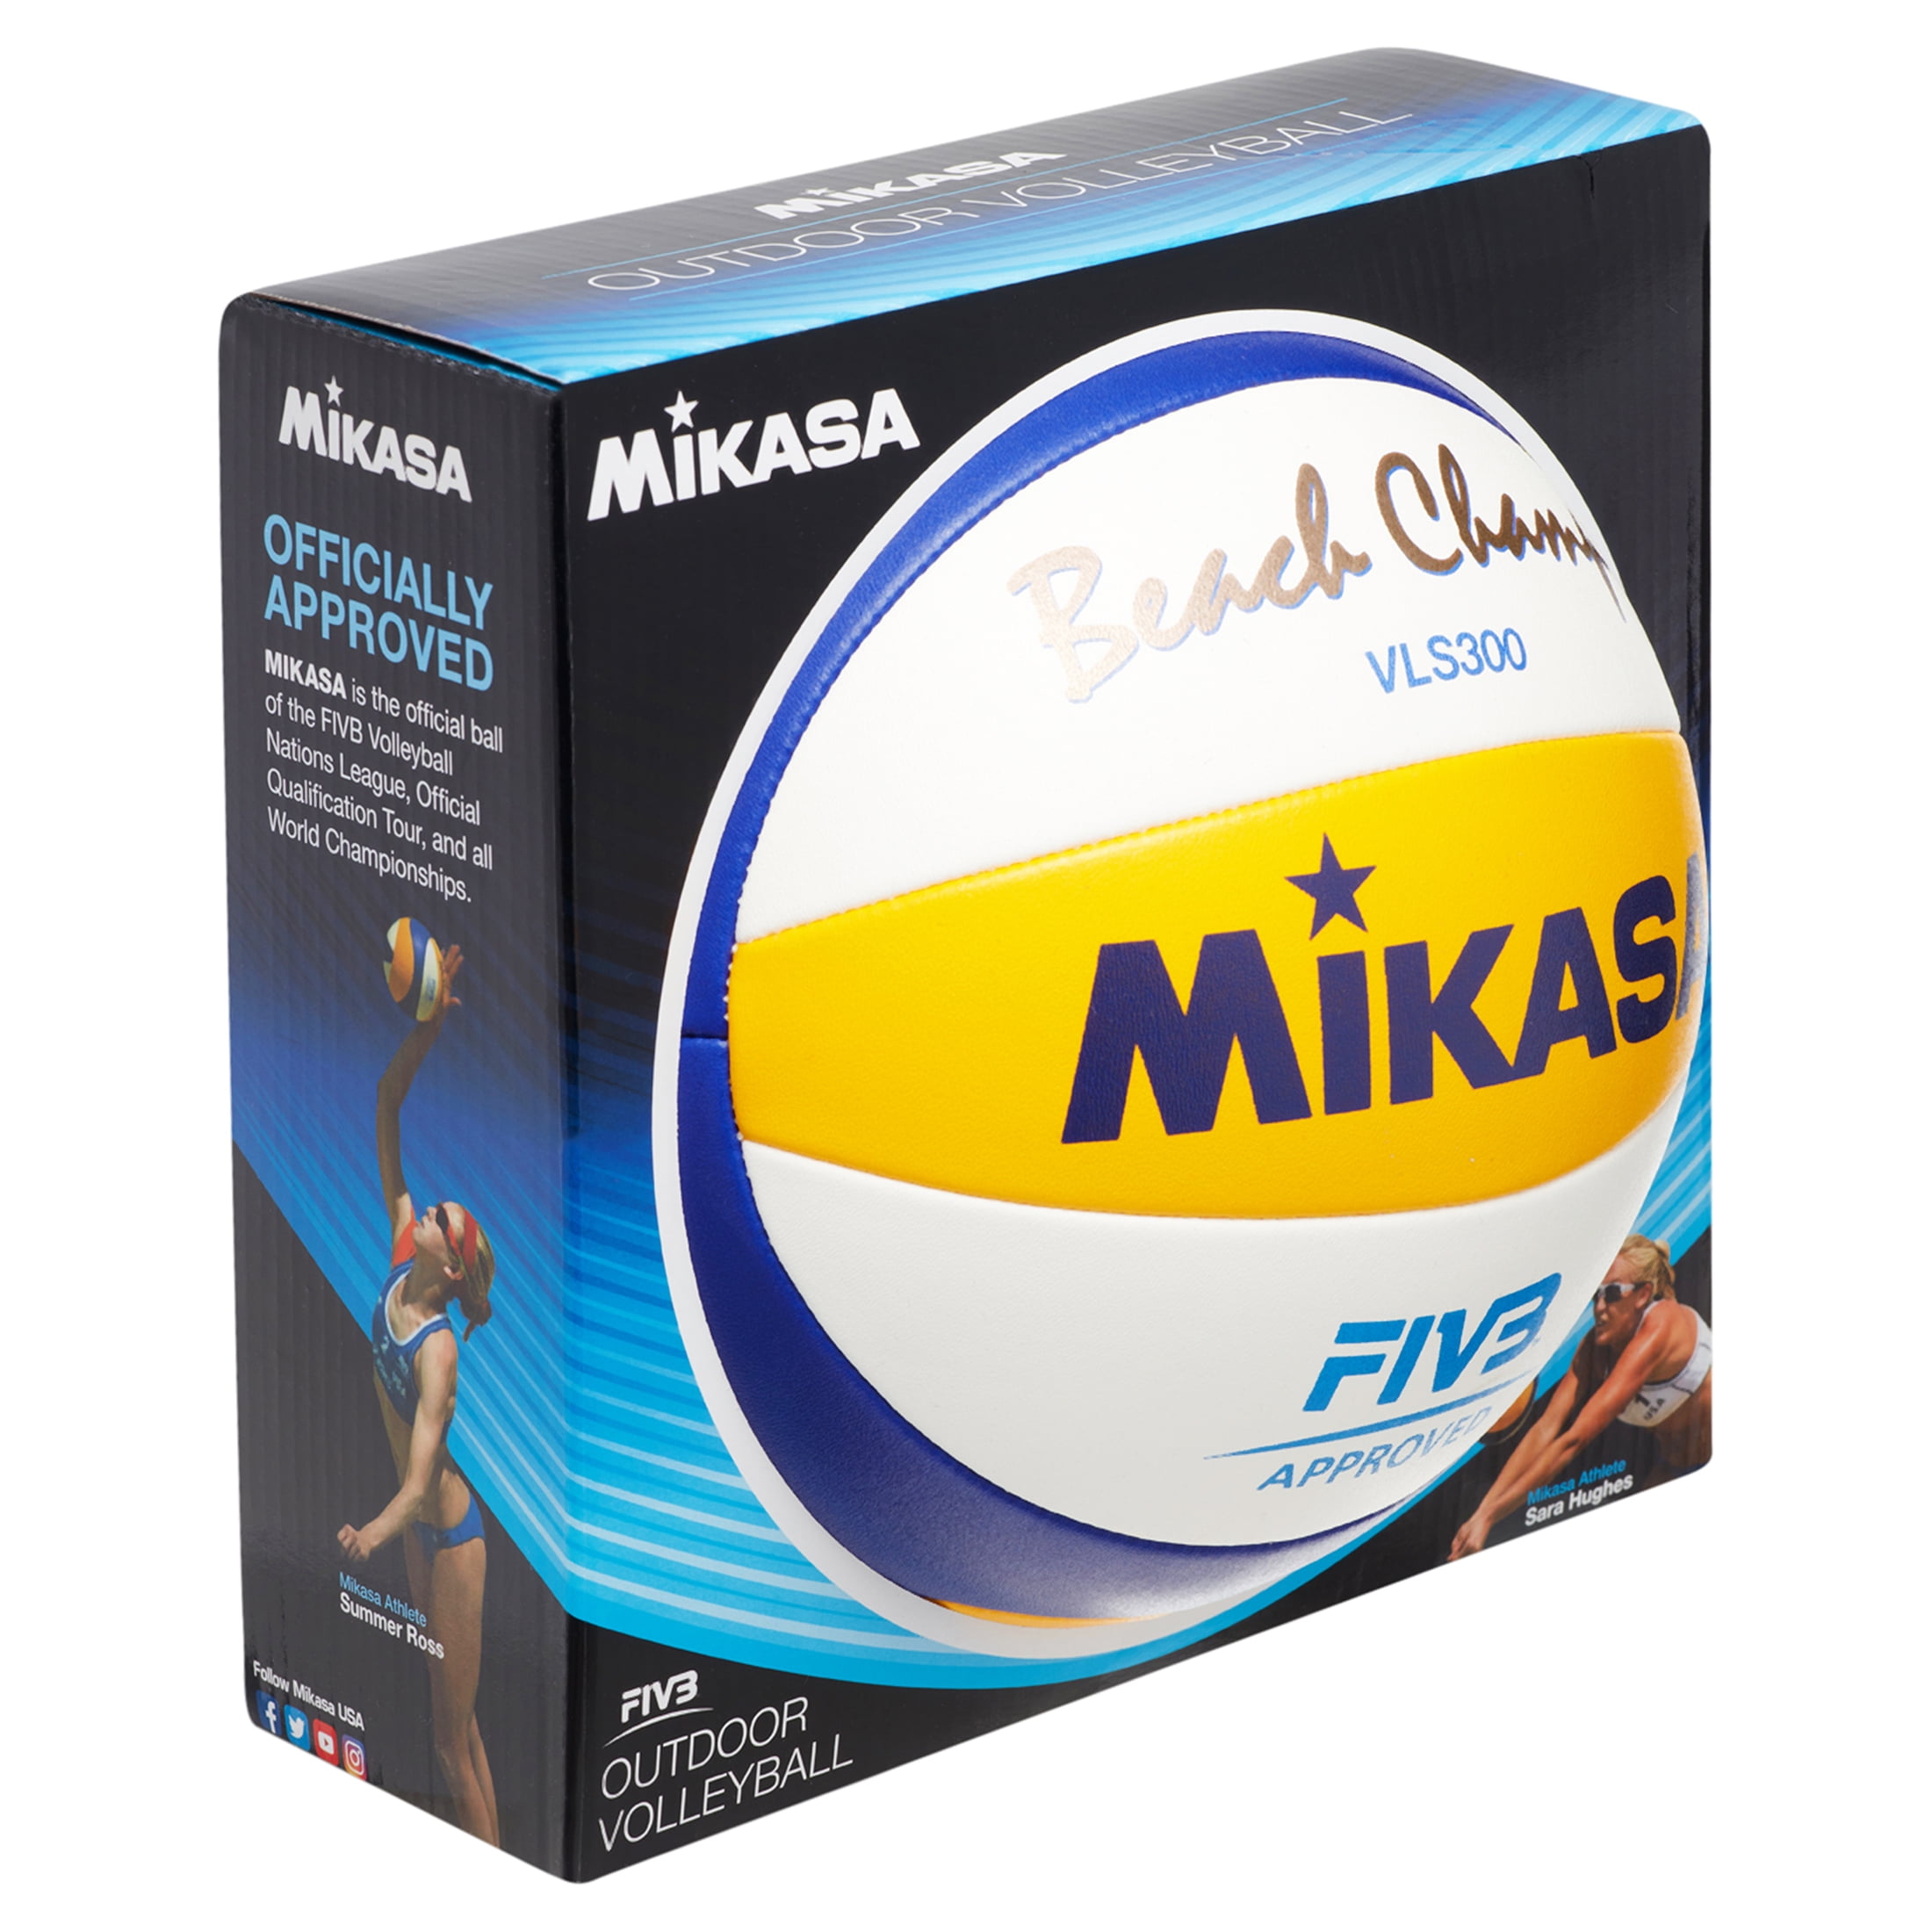 MIKASA VLS300-BEACH CHAMP-OFFICIAL FIVB OUTDOOR GAME VOLLEYBALL 